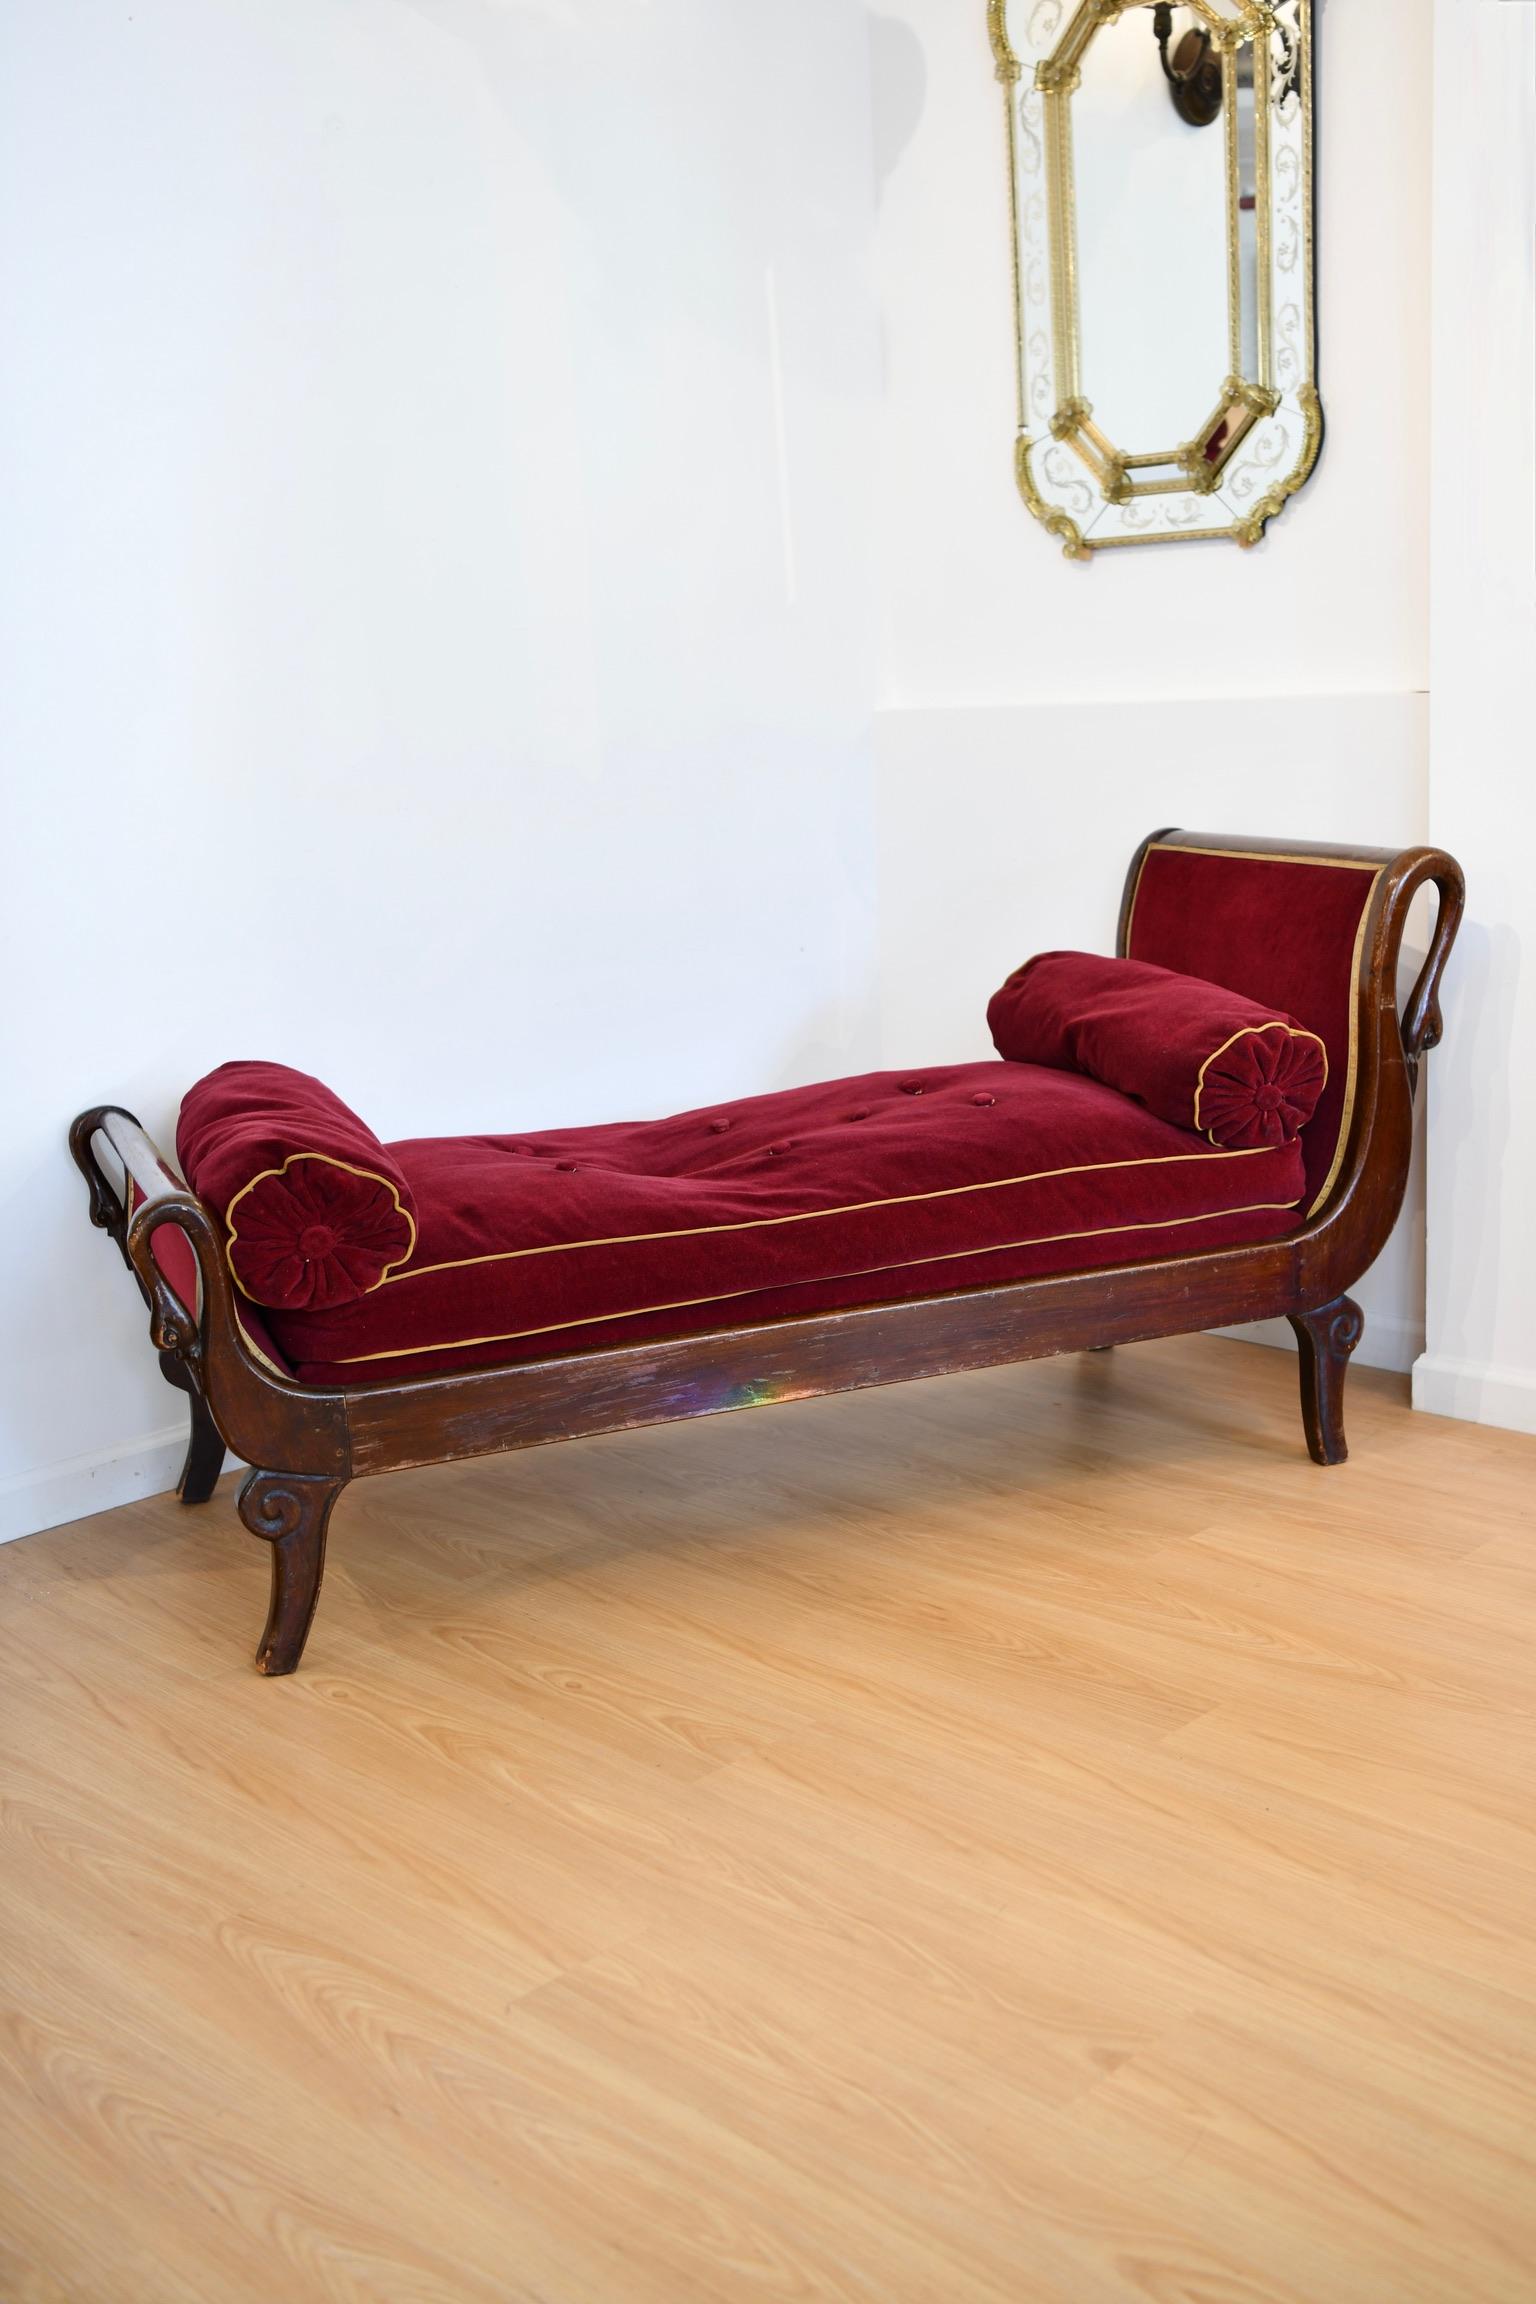 Antique French mahogany chaise lounge with carved swan heads at posts, maroon upholstery and bolster pillows, circa 1930. Matching chairs available, sold separately. Dimensions: 32.5